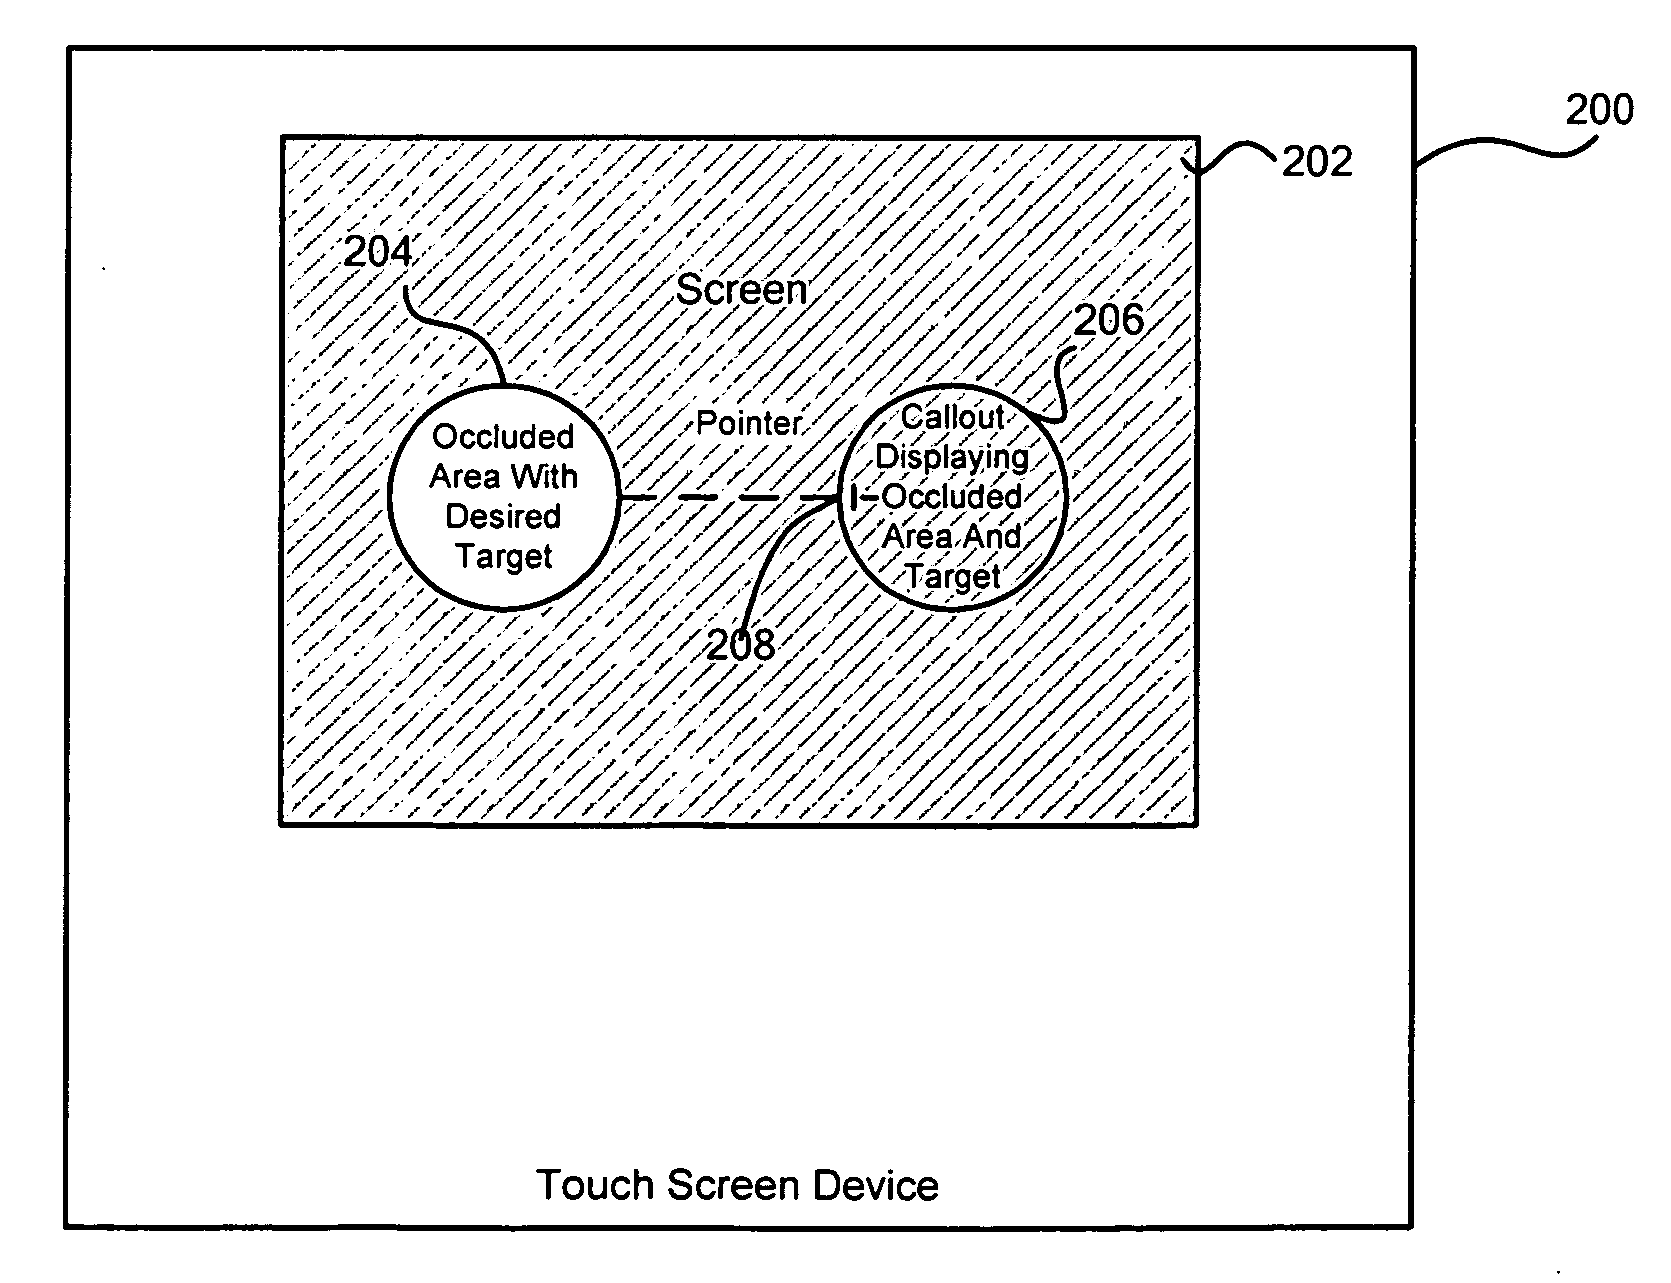 Operating touch screen interfaces